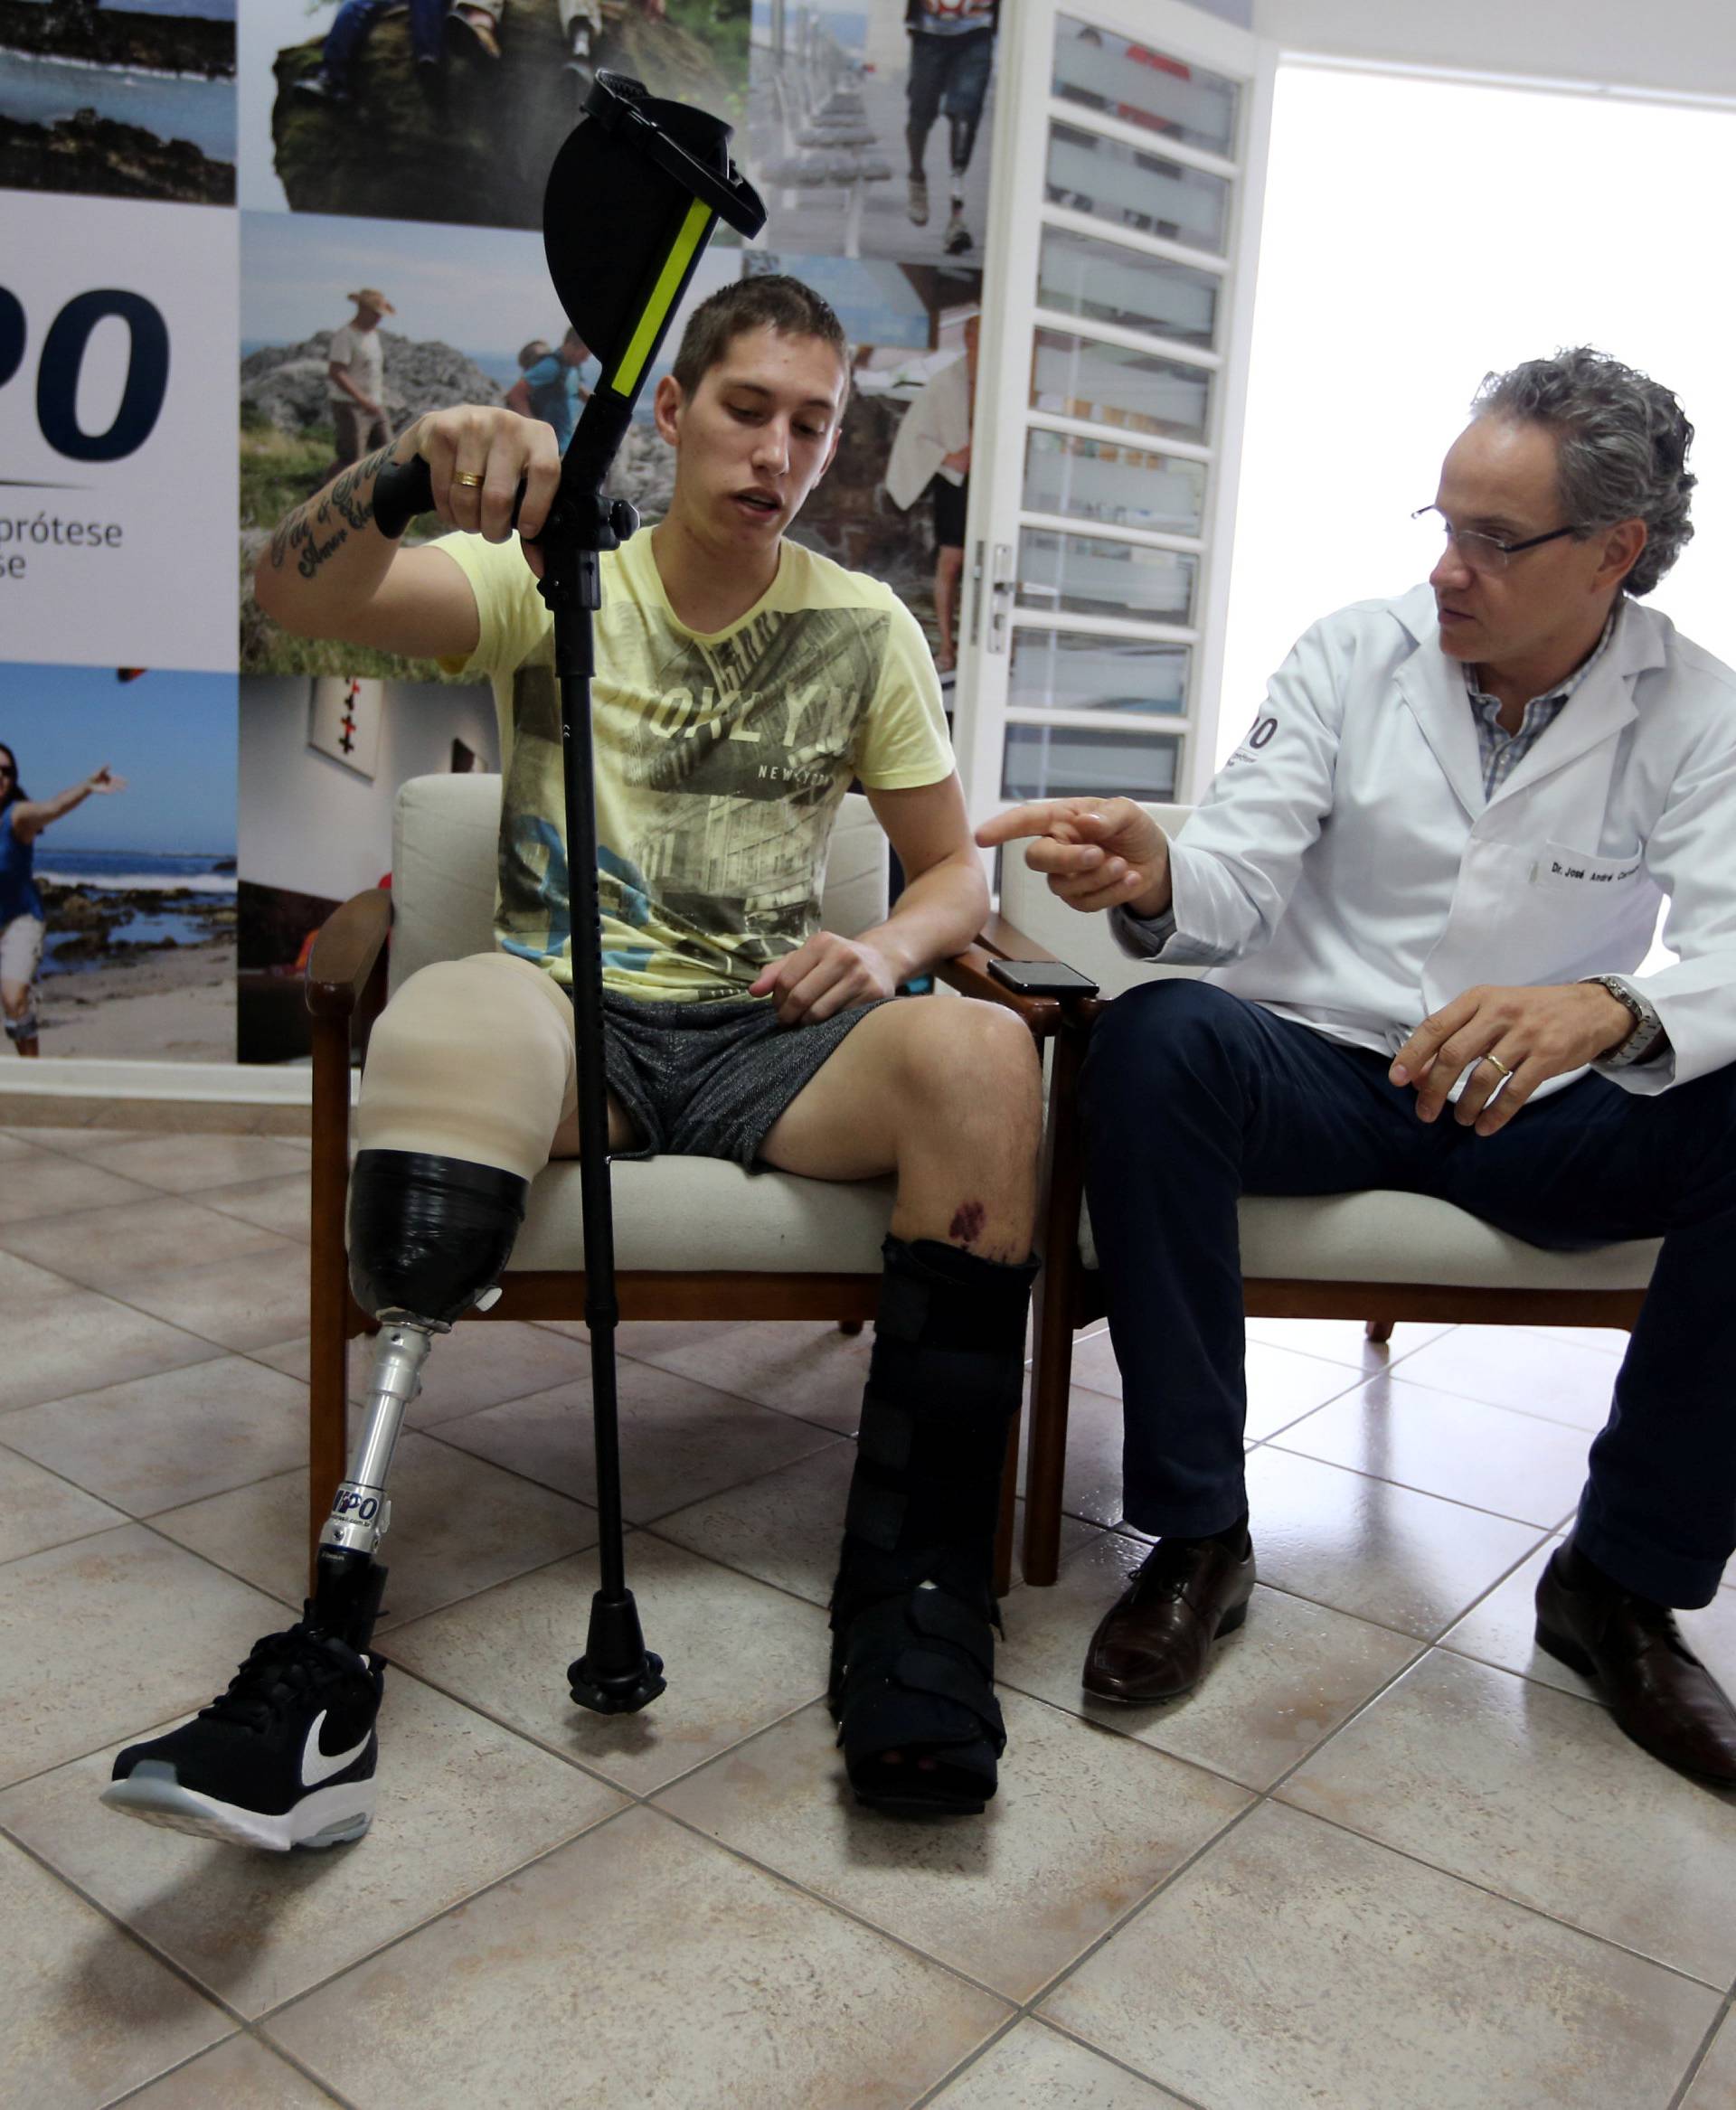 Goalkeeper Jackson Follmann, who survived when the plane carrying Brazilian soccer team Chapecoense crashed, talks with Dr. Jose Carvalho as they try on a prosthetic leg in Sao Paulo